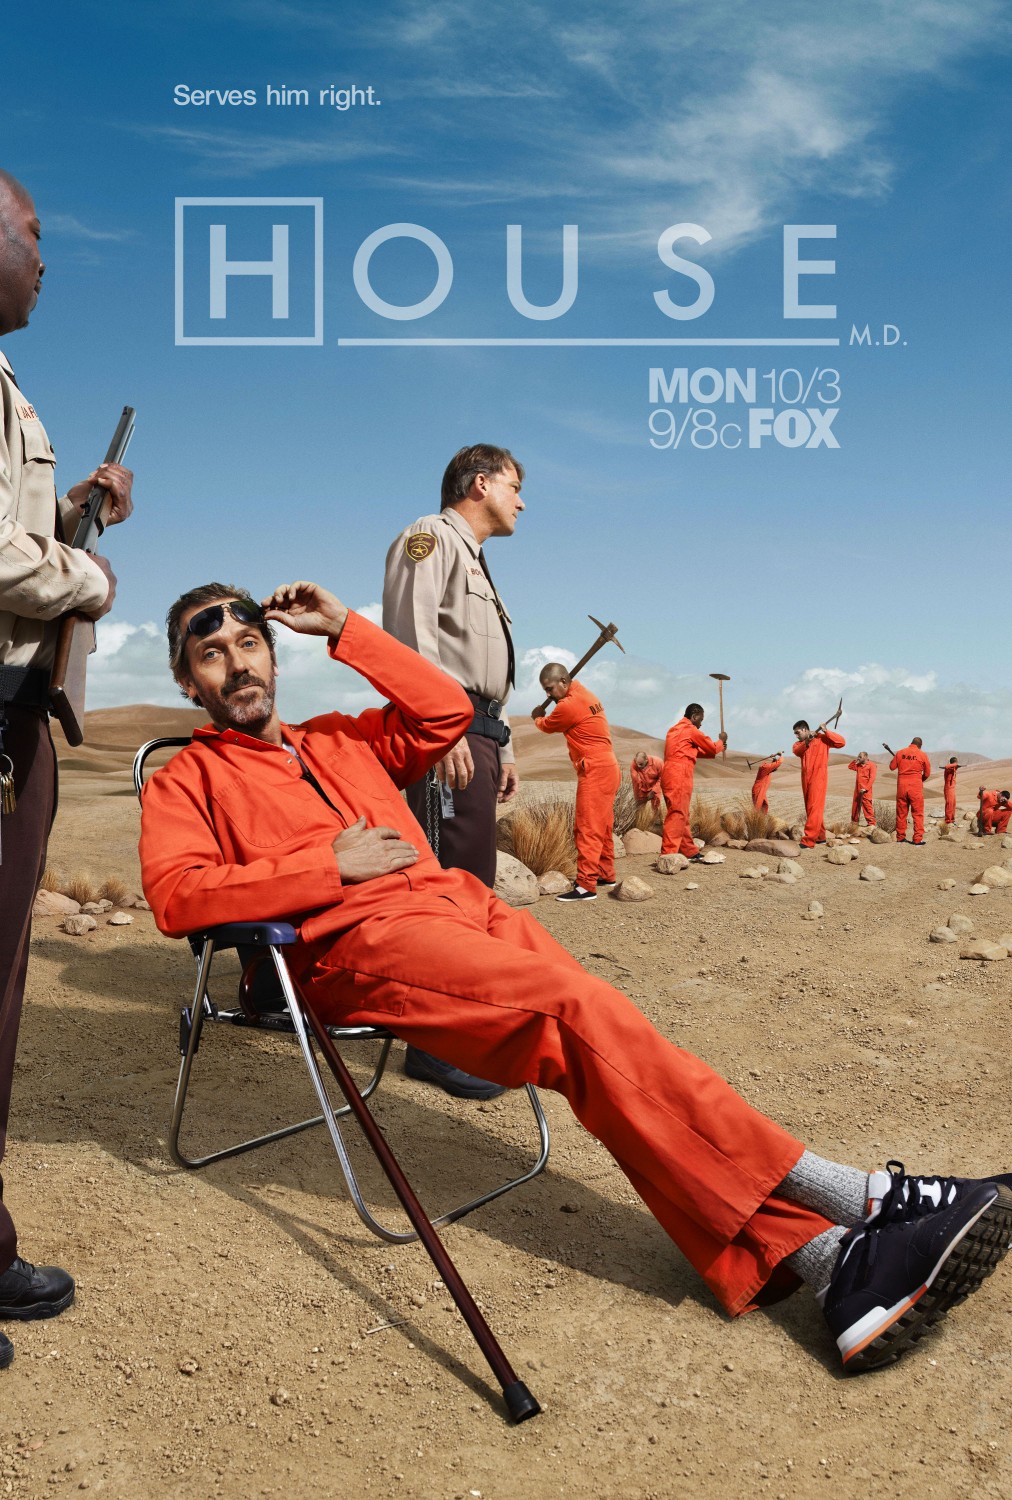 Extra Large TV Poster Image for House, M.D. (#16 of 20)